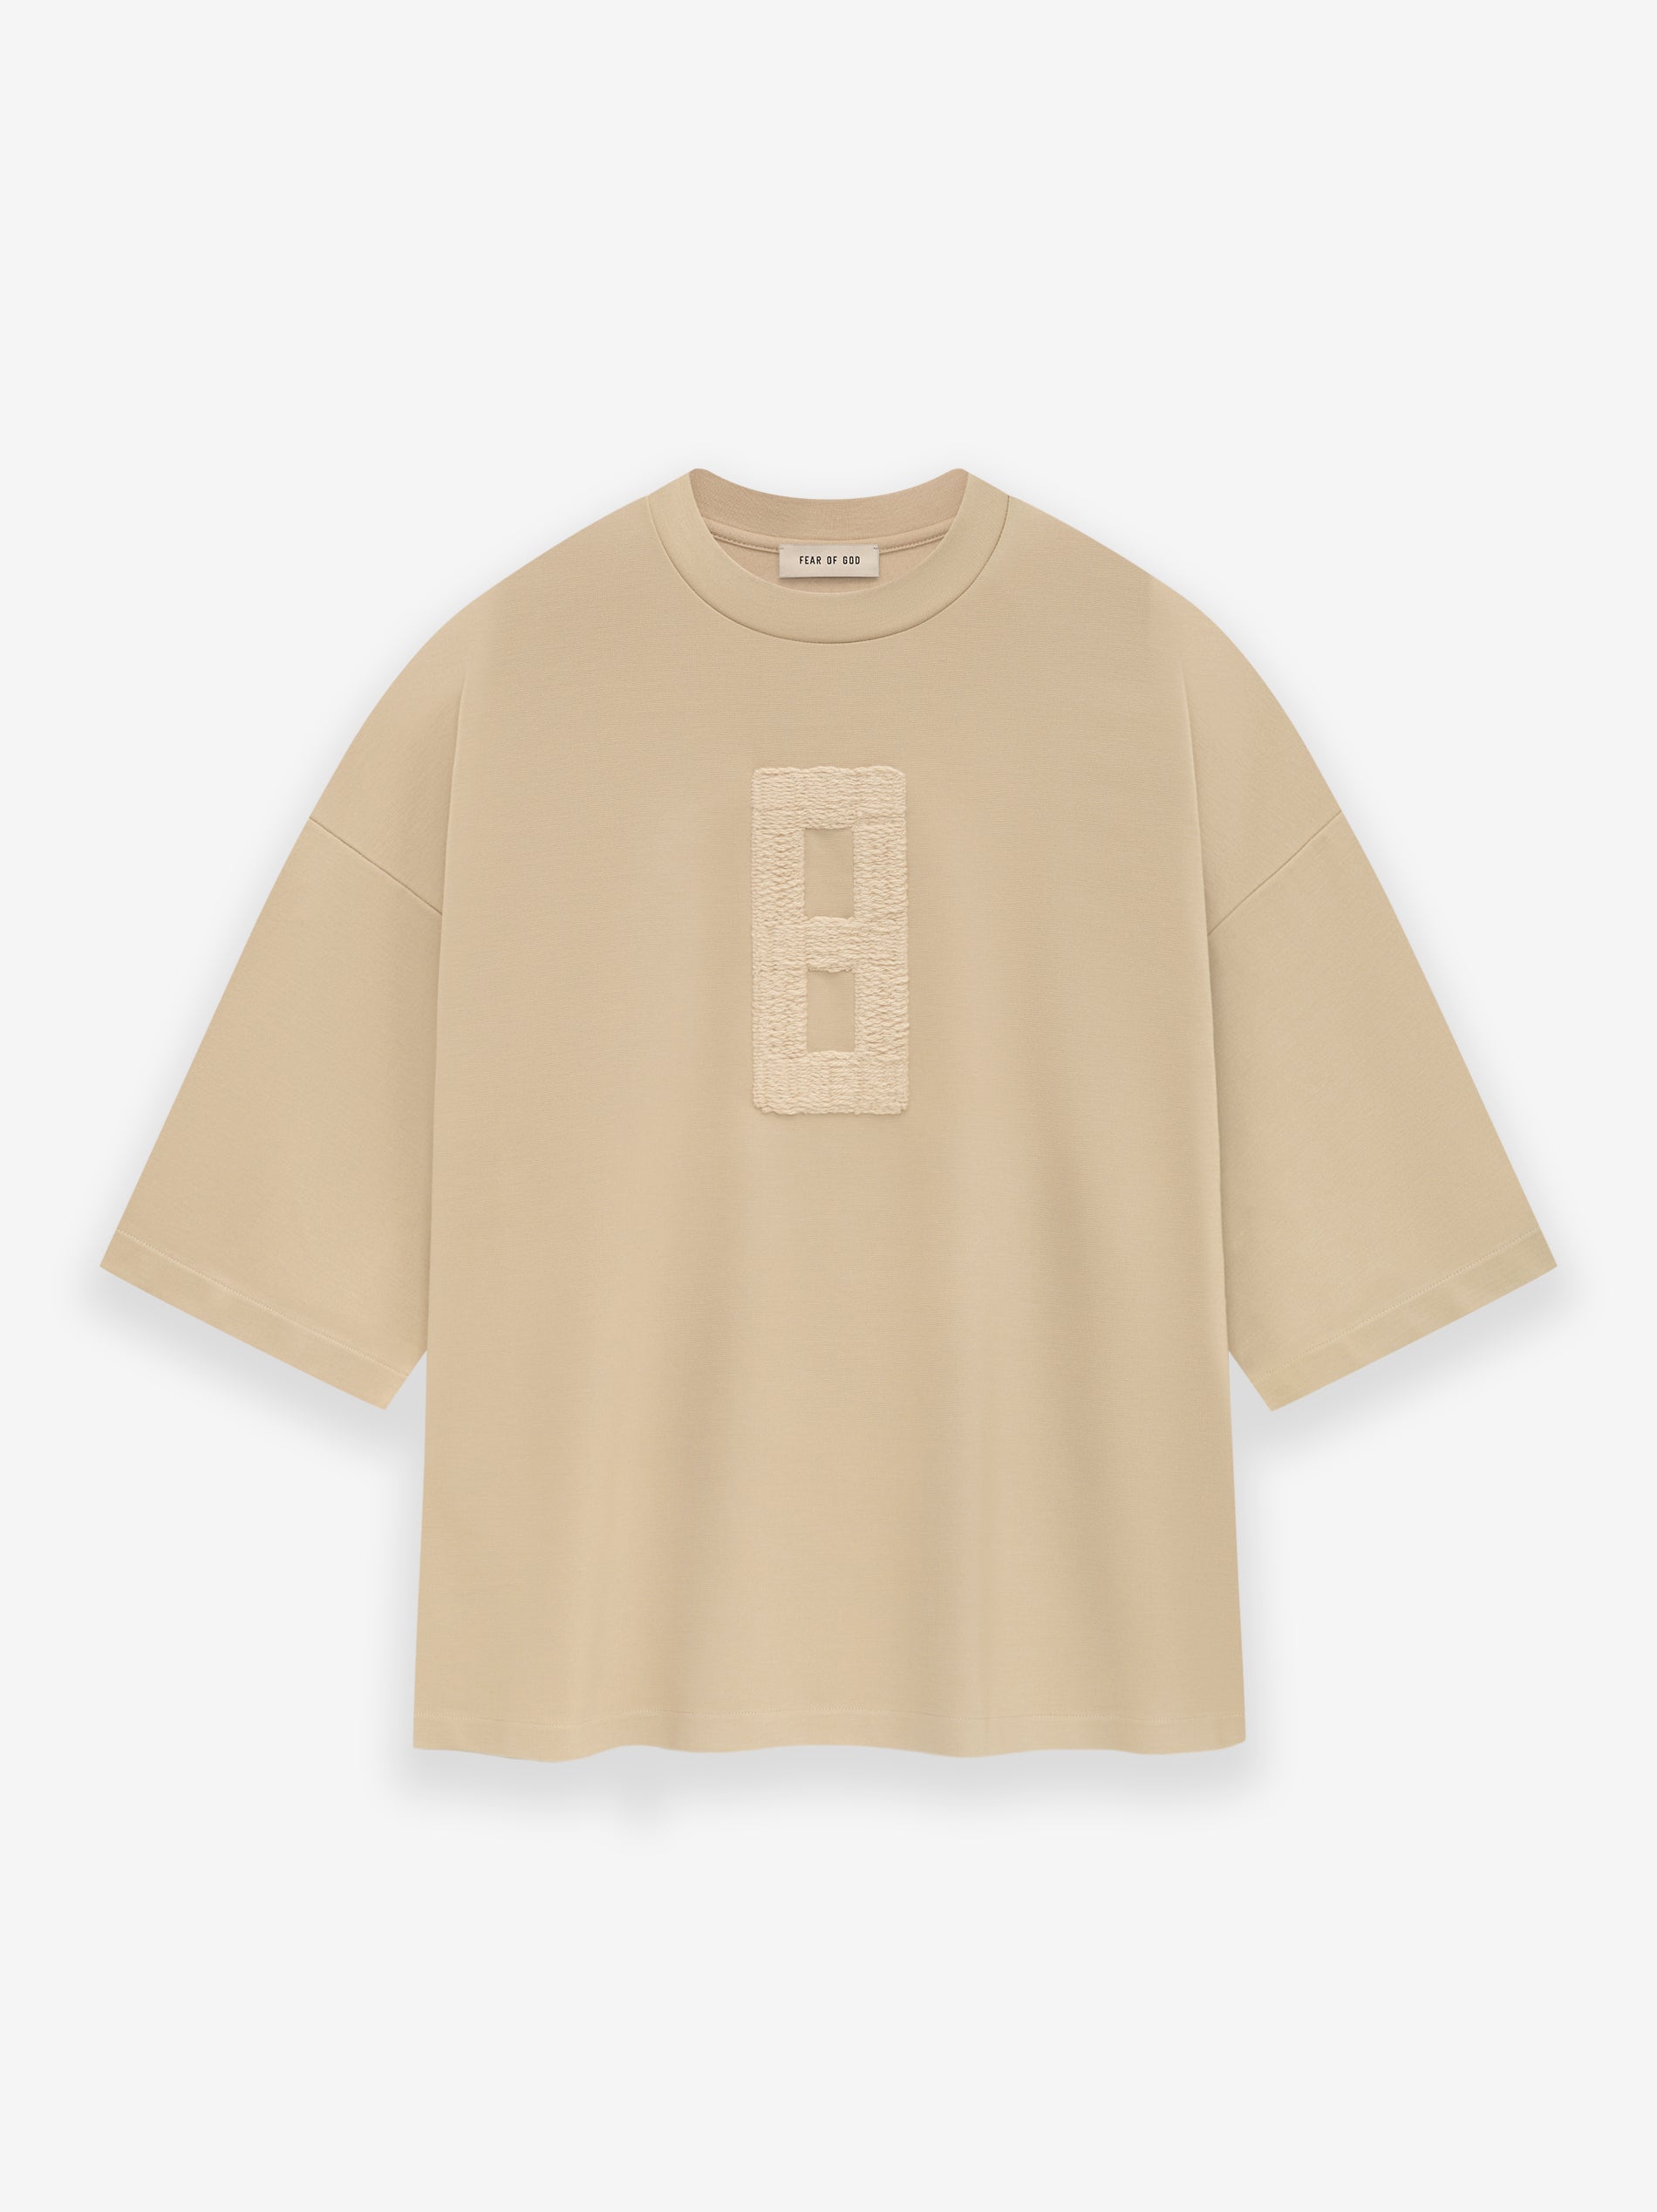 Embroidered 8 Milano Tee | Fear of God